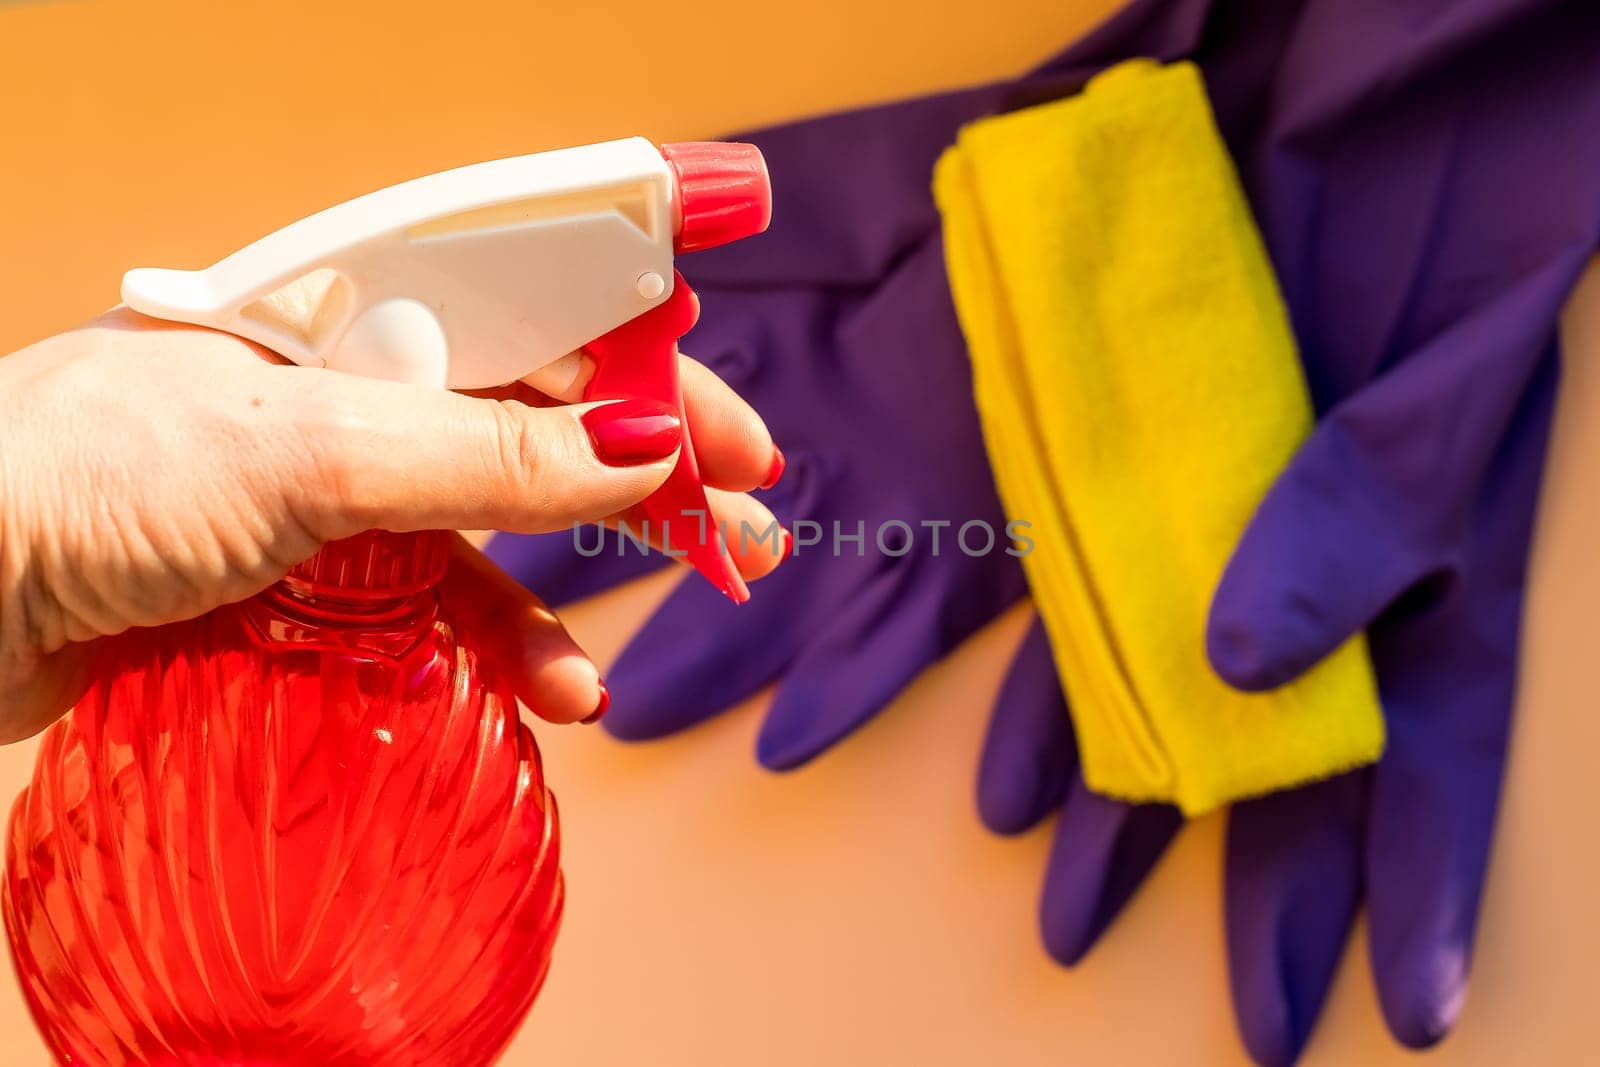 Employee hand holding spray bottle.Cleaning equipment - gloves, sponge and rags on pastel background. Purity concept.purple rubber glove with microfiber cloth.Cleaning items by YuliaYaspe1979